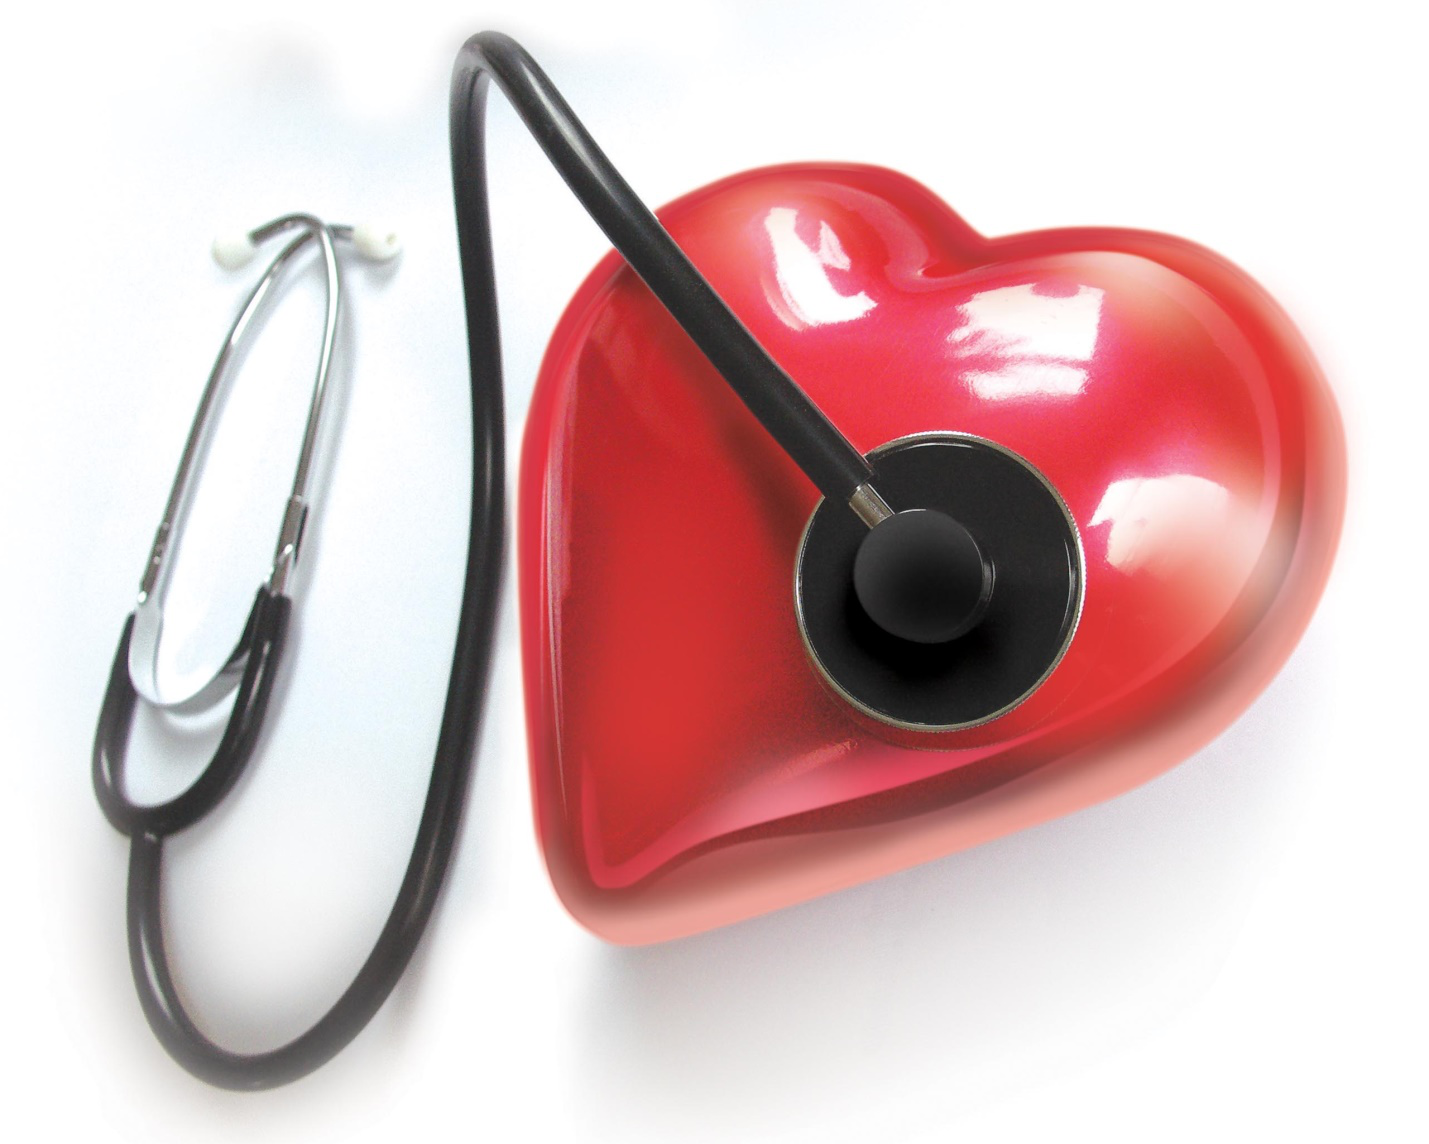 Annual Heart Checkups That You Should Get Done